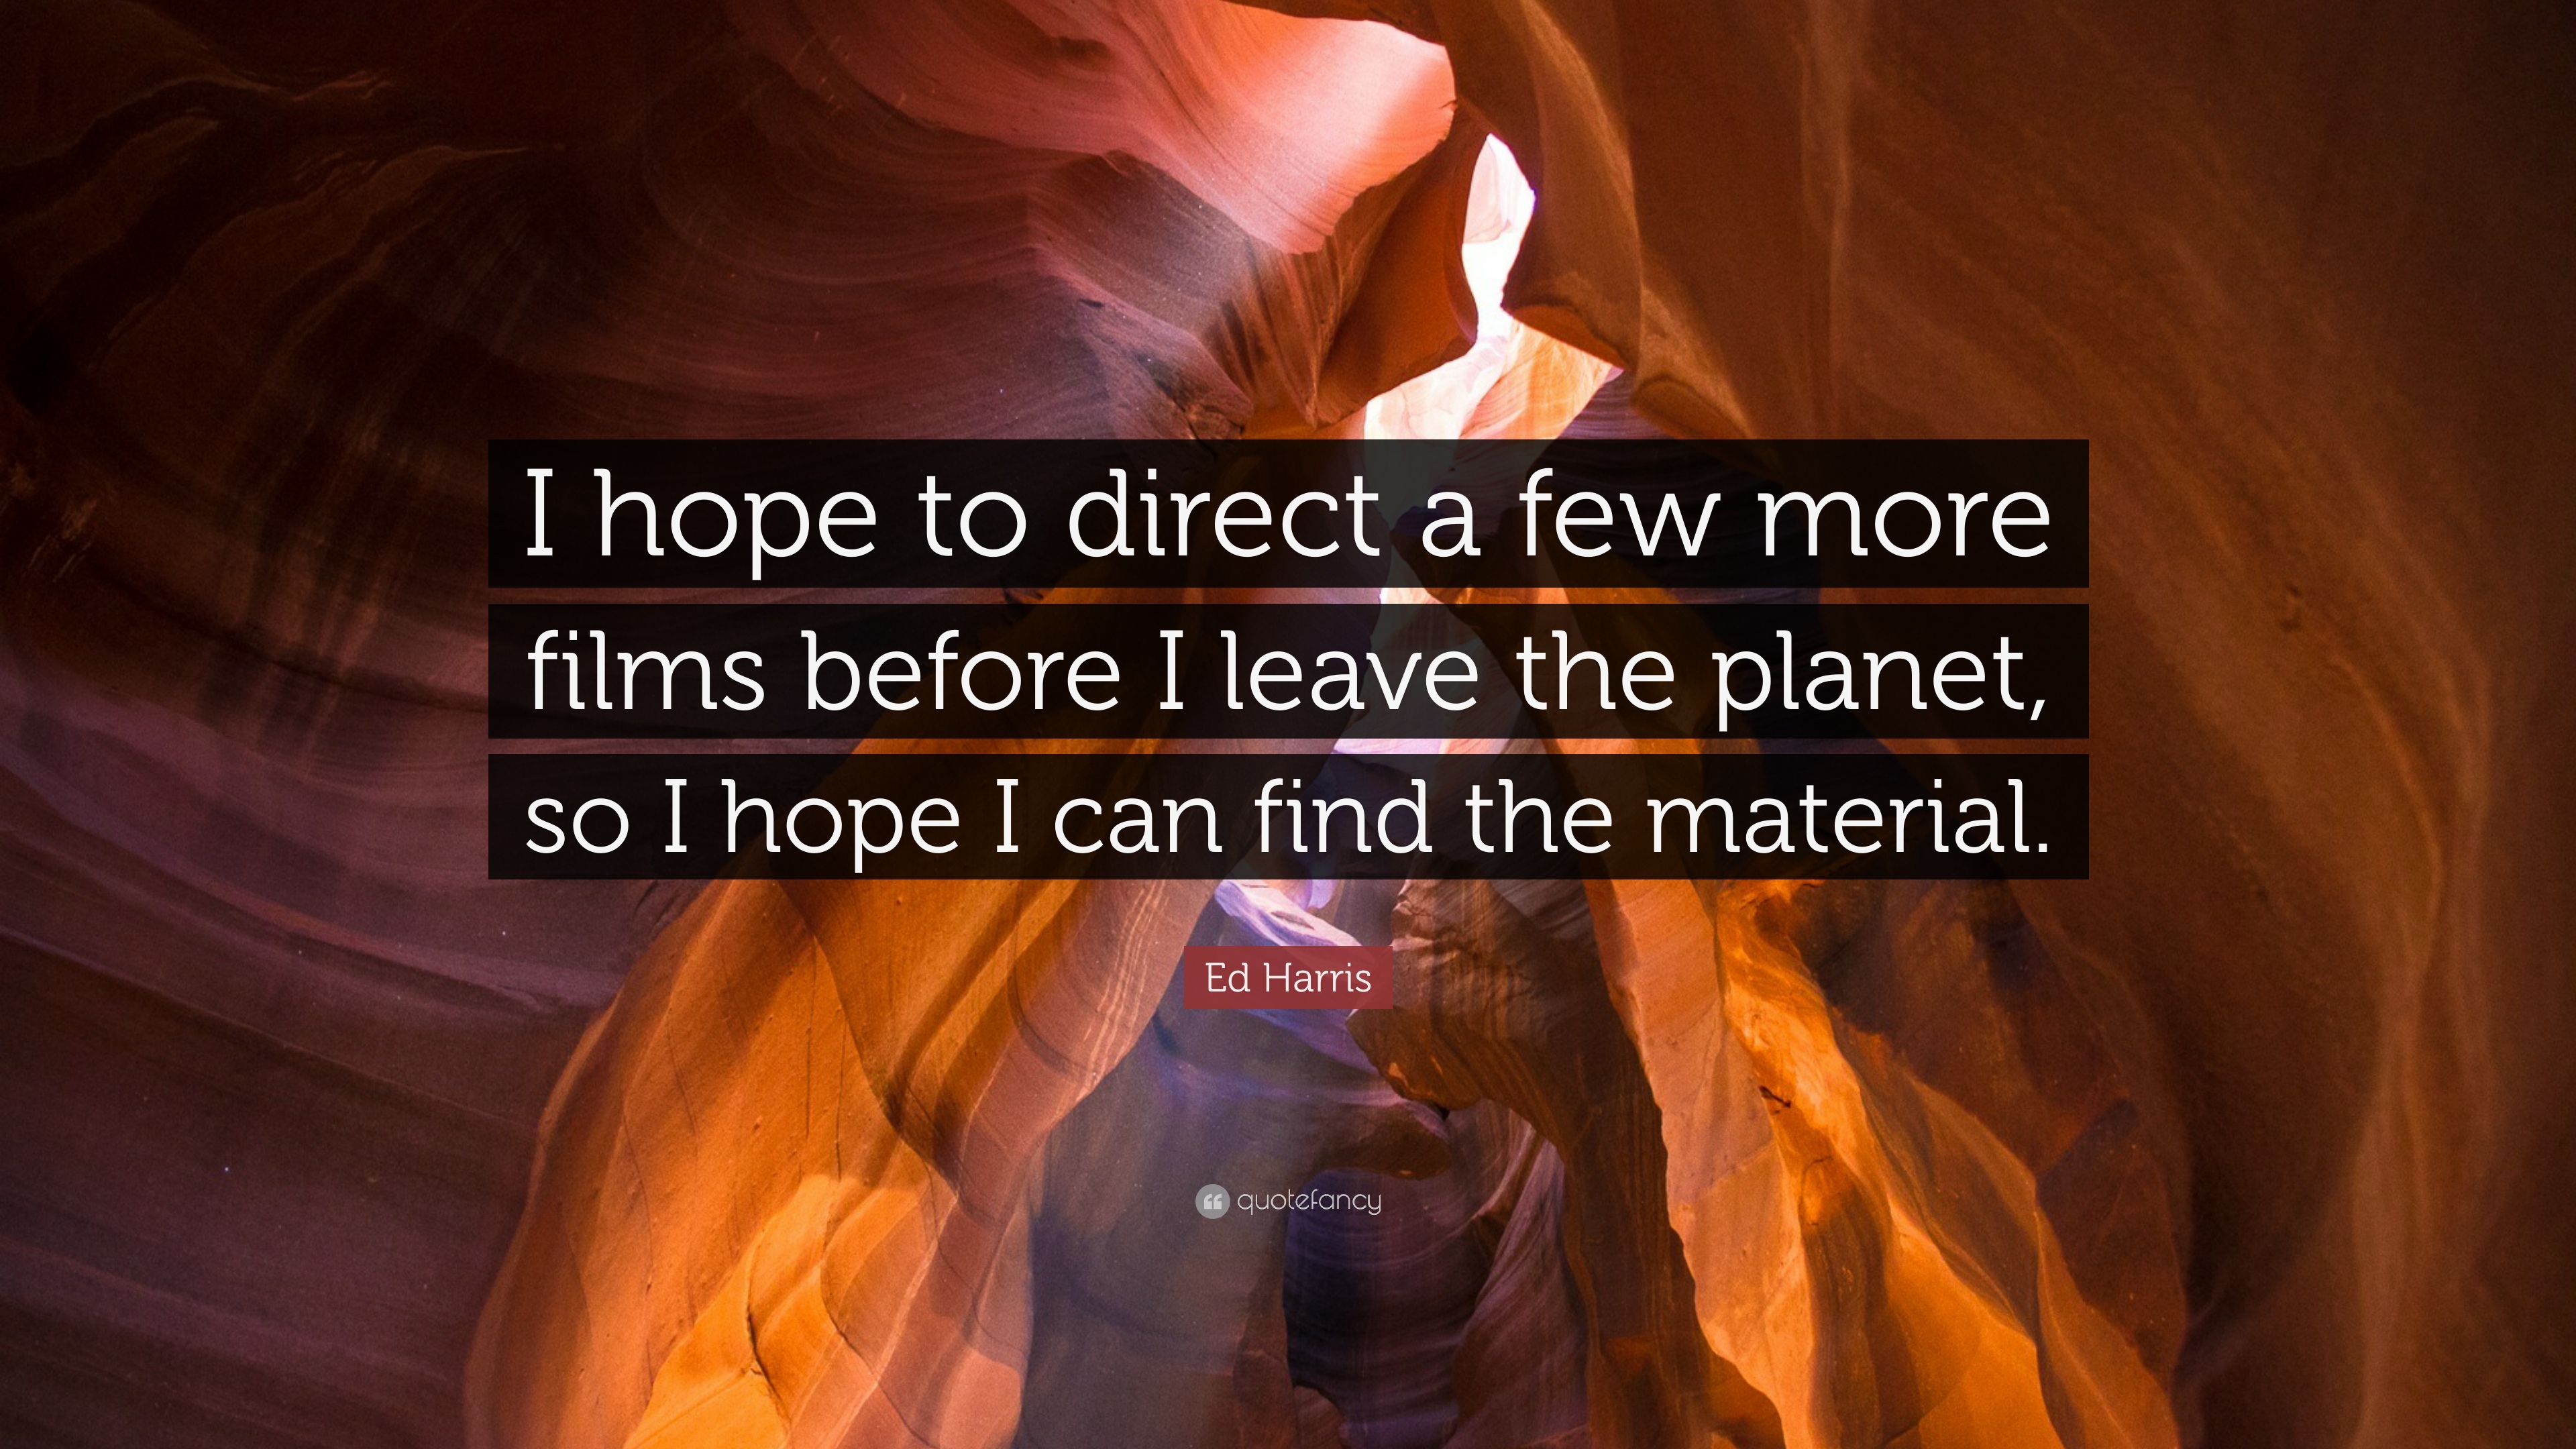 Ed Harris Quote: “I hope to direct a few more films before I leave